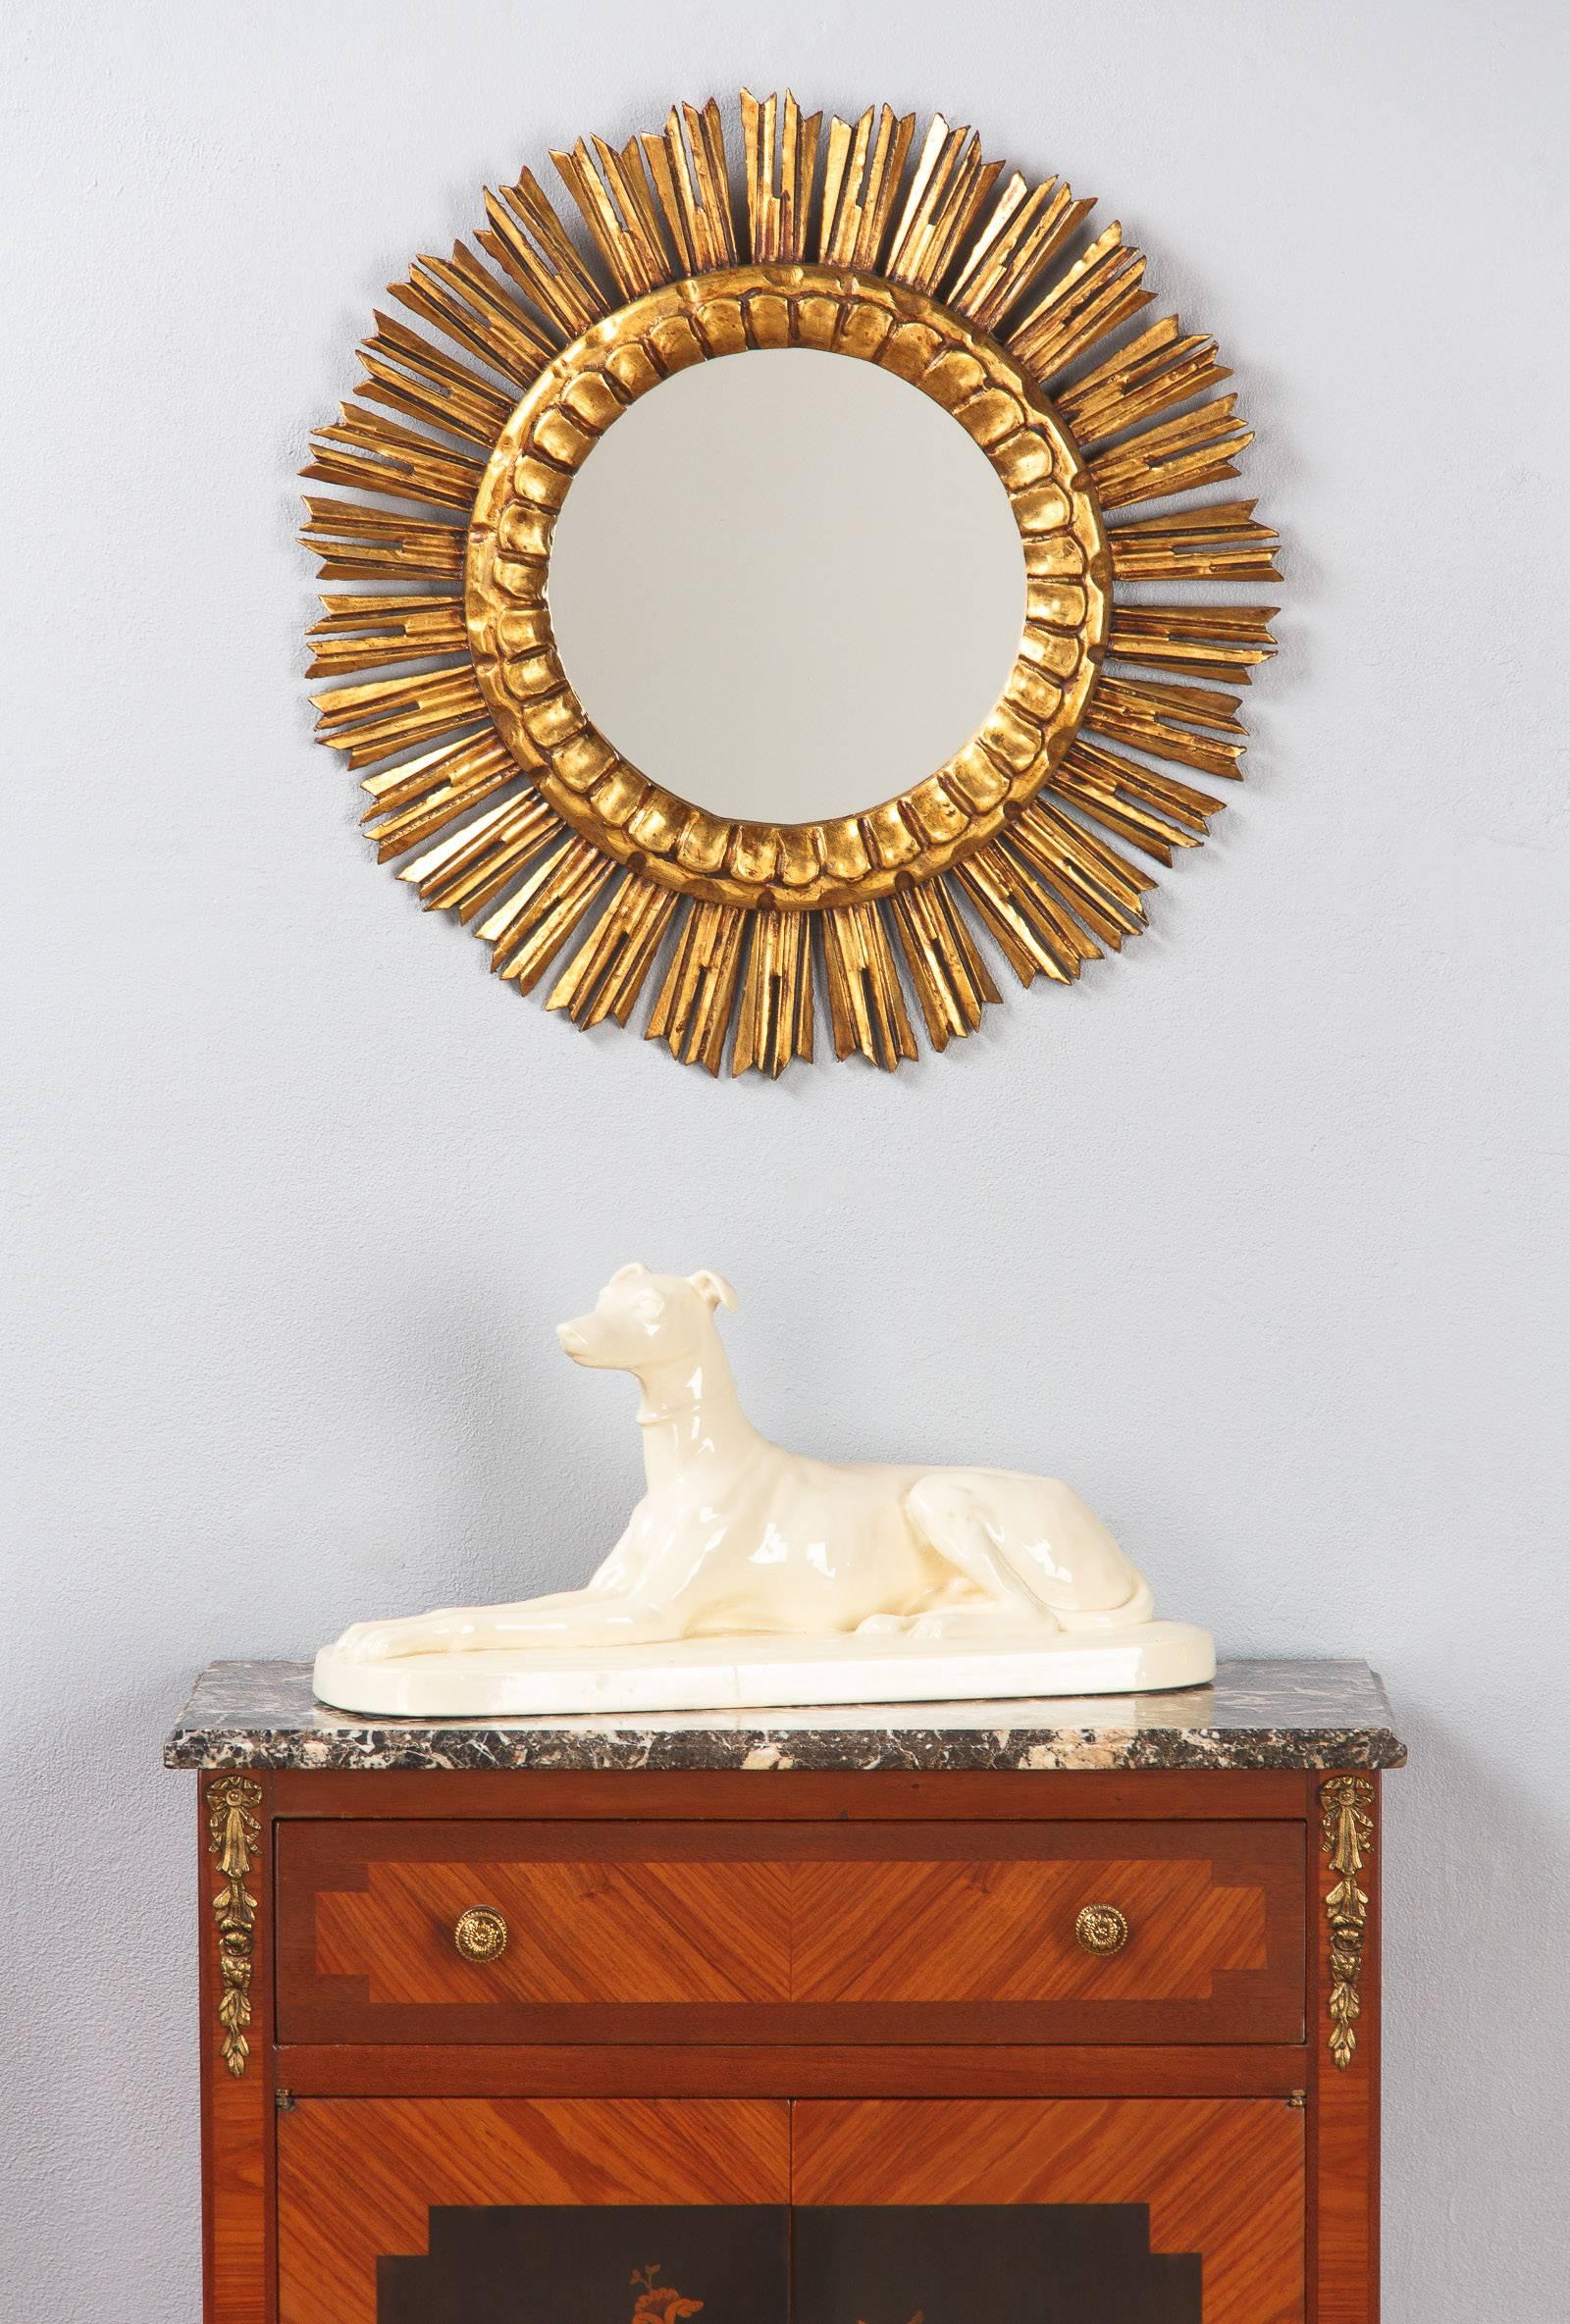 A round sunburst mirror made of giltwood with a nice aged patina. The glass is 9.5